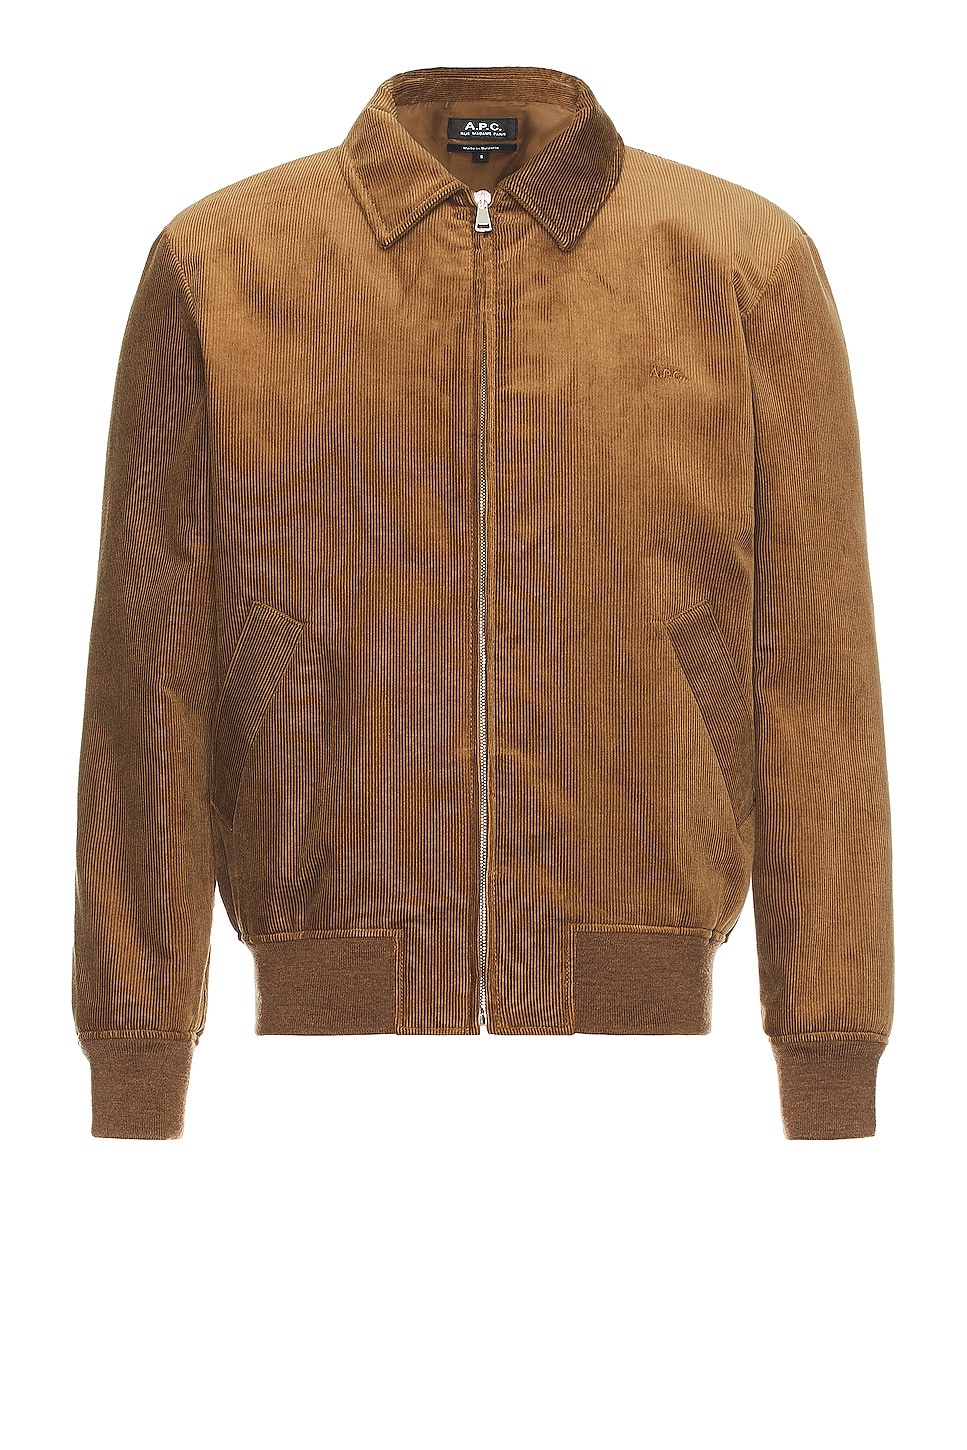 Image 1 of A.P.C. Blouson Gilles in Cab Camel